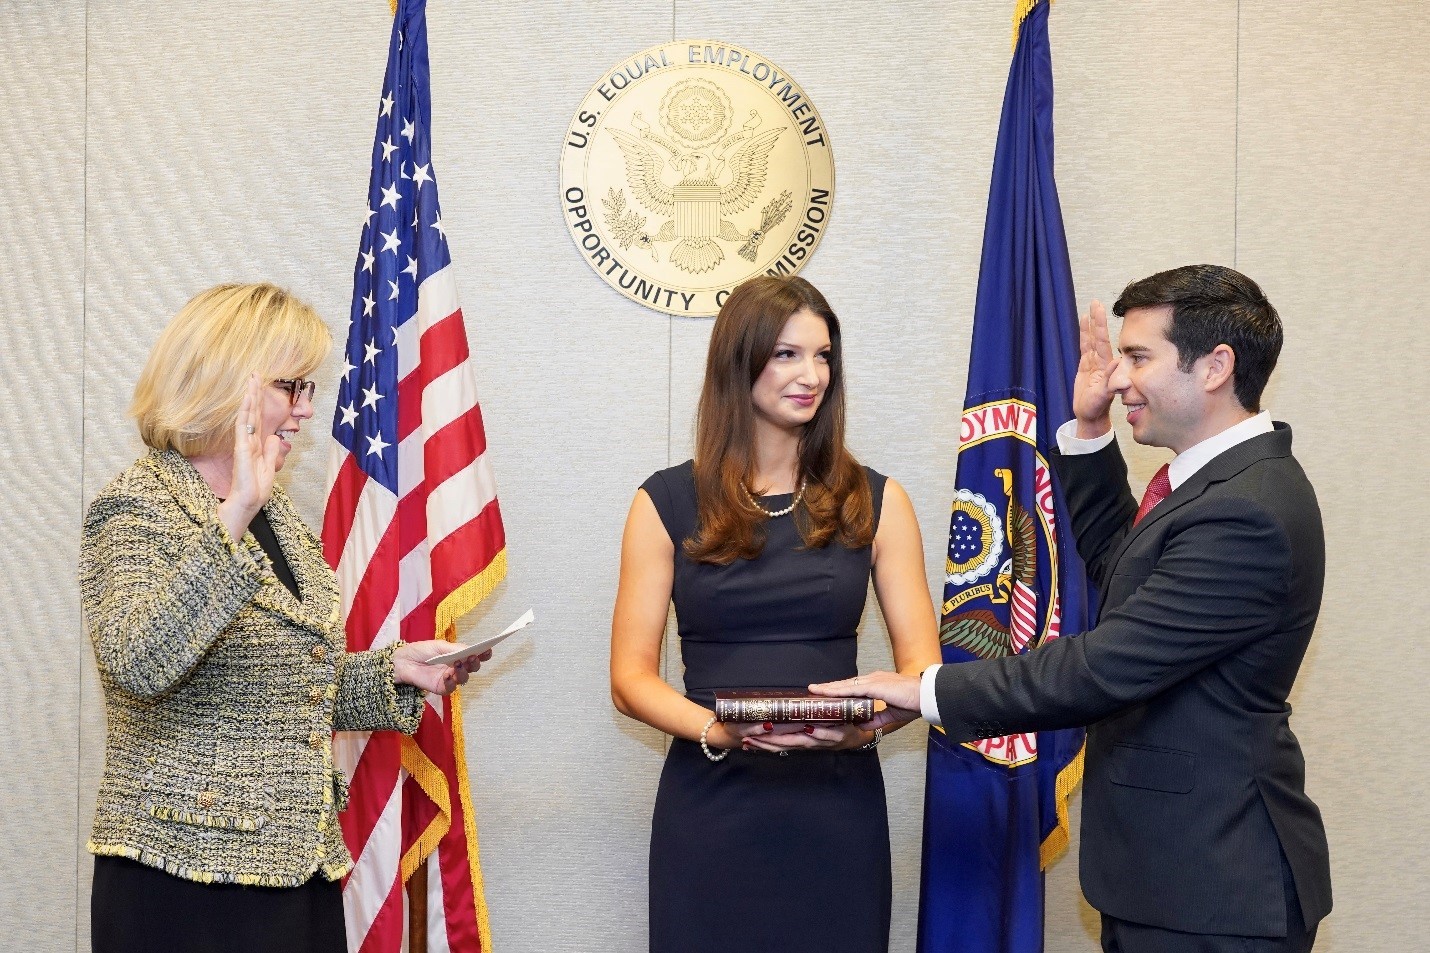 Swearing in of Keith E. Sonderling as EEOC Commissioner